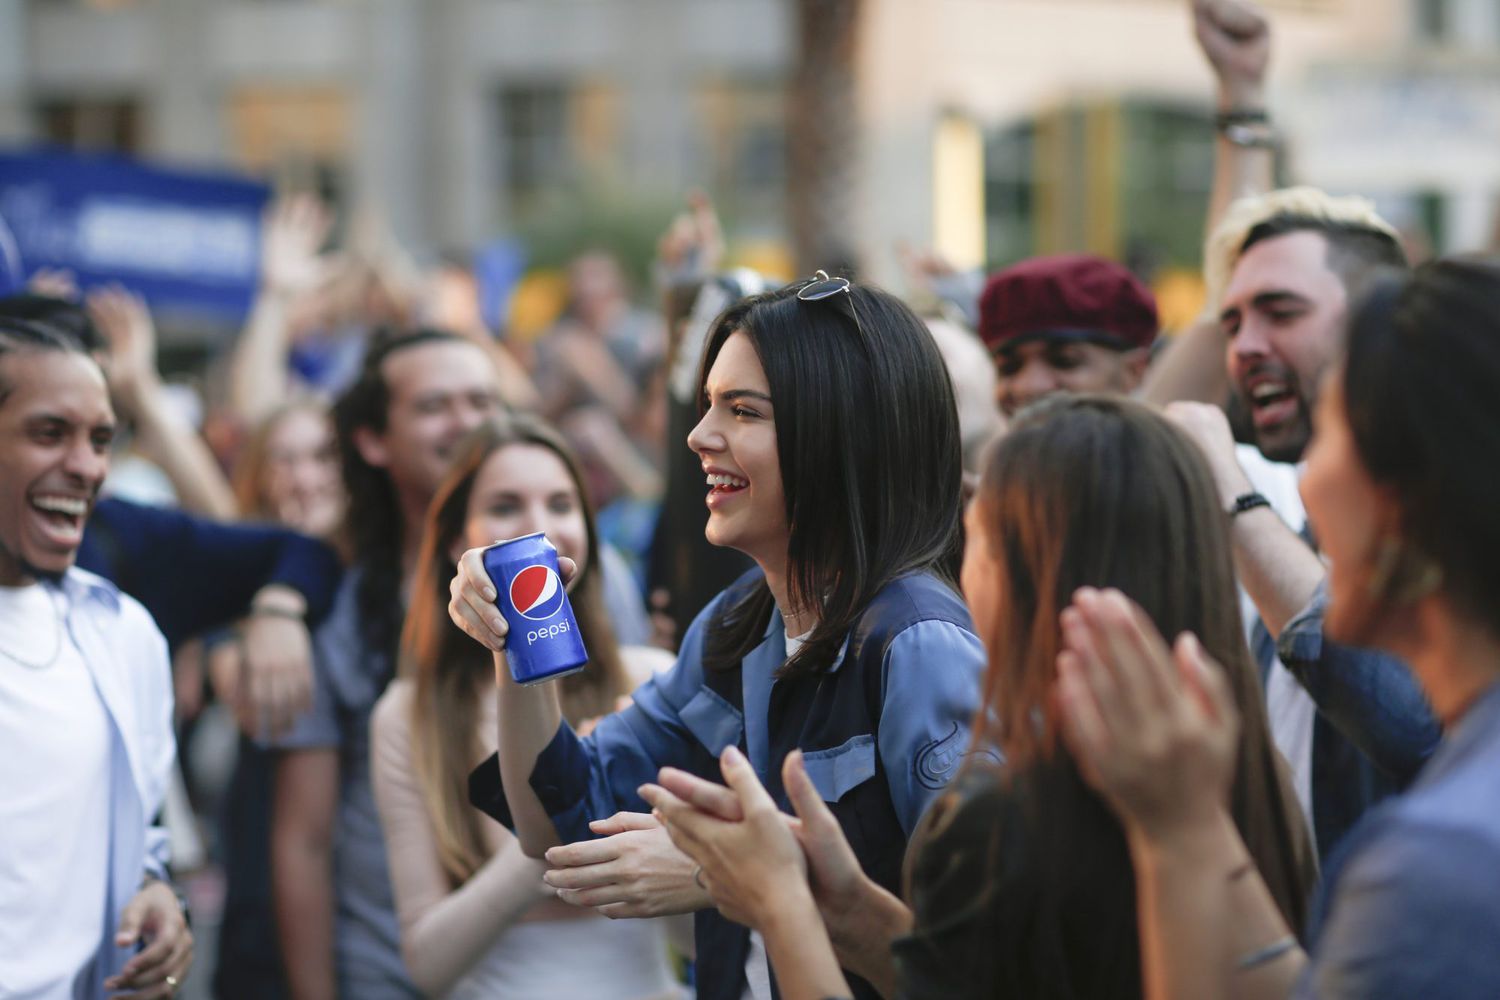 Kendall Jenner pepsi campaign